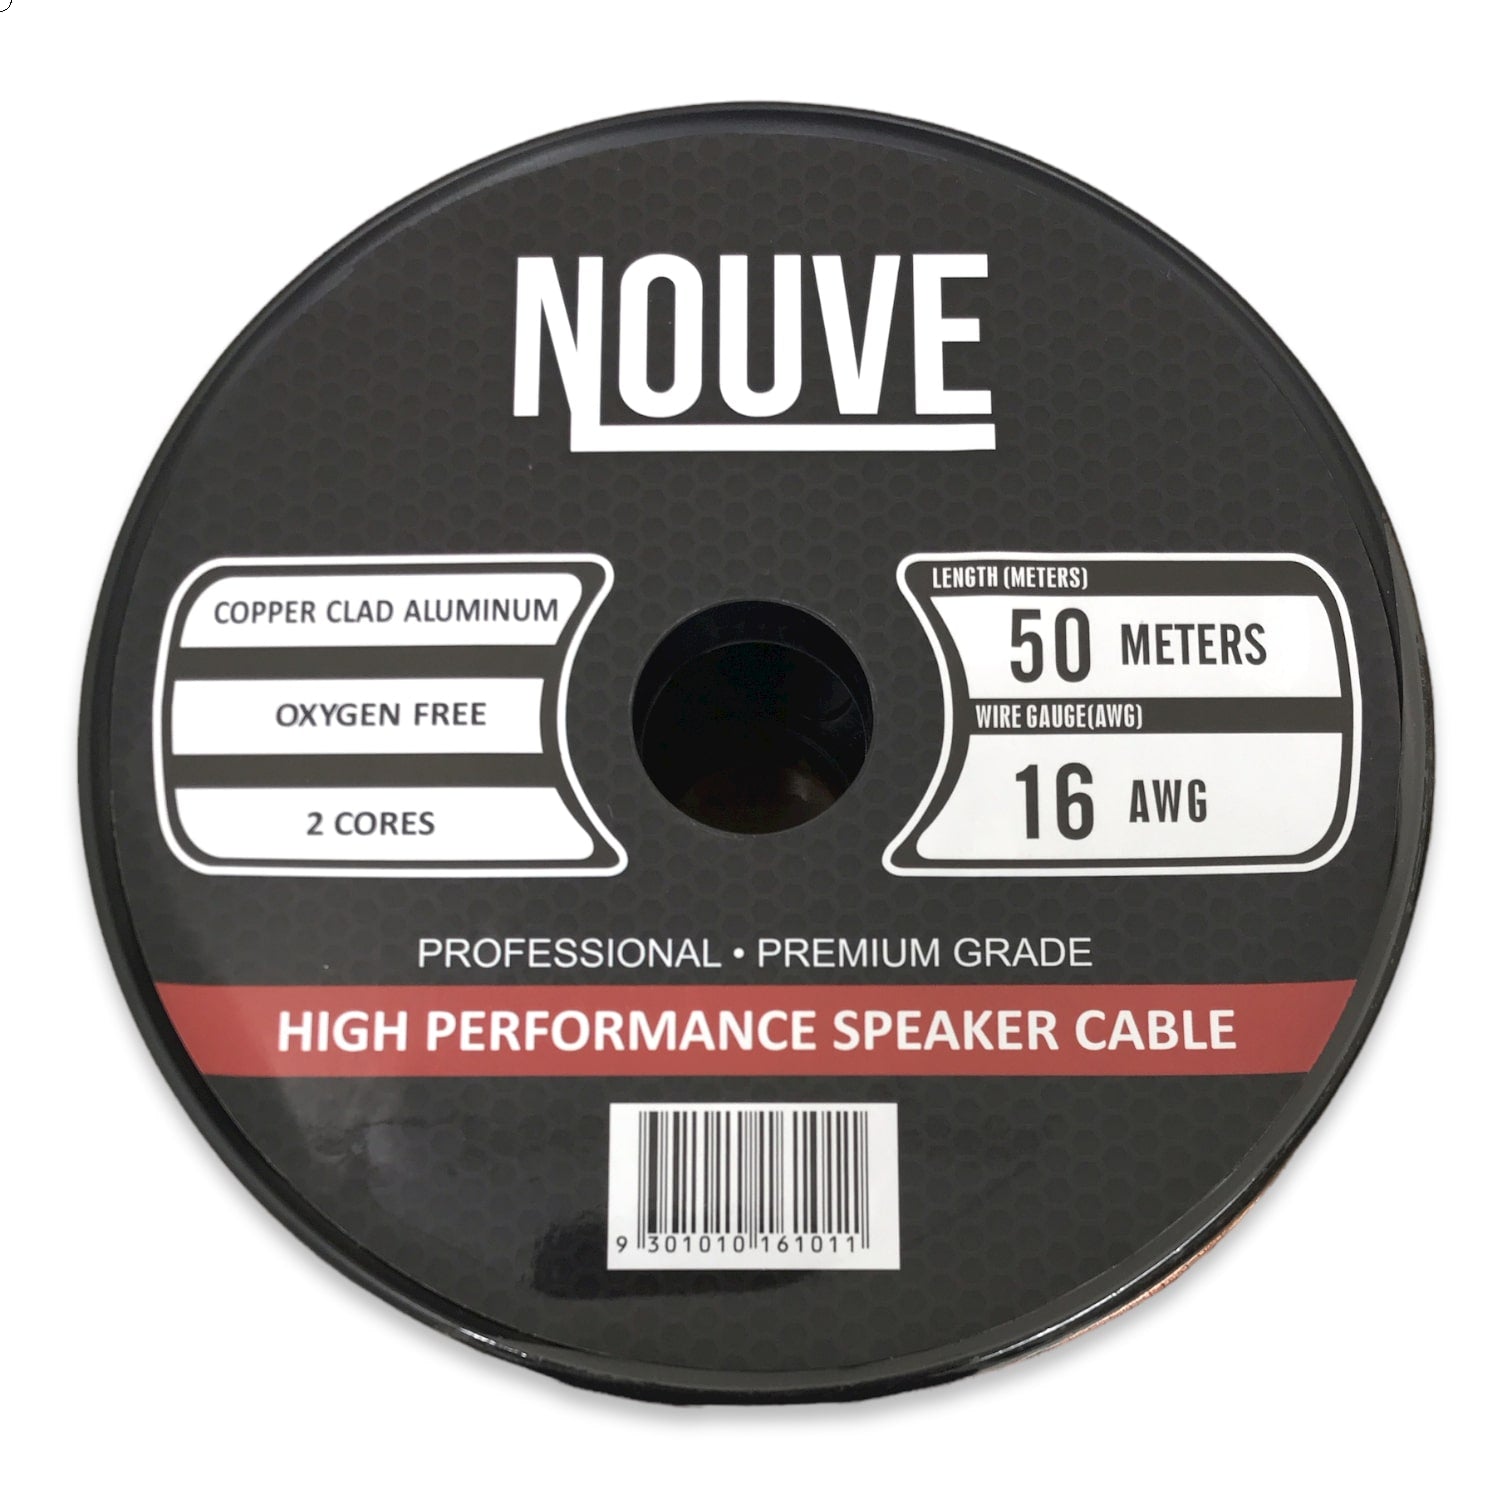 16 awg speaker cable 50m cca nouve cover